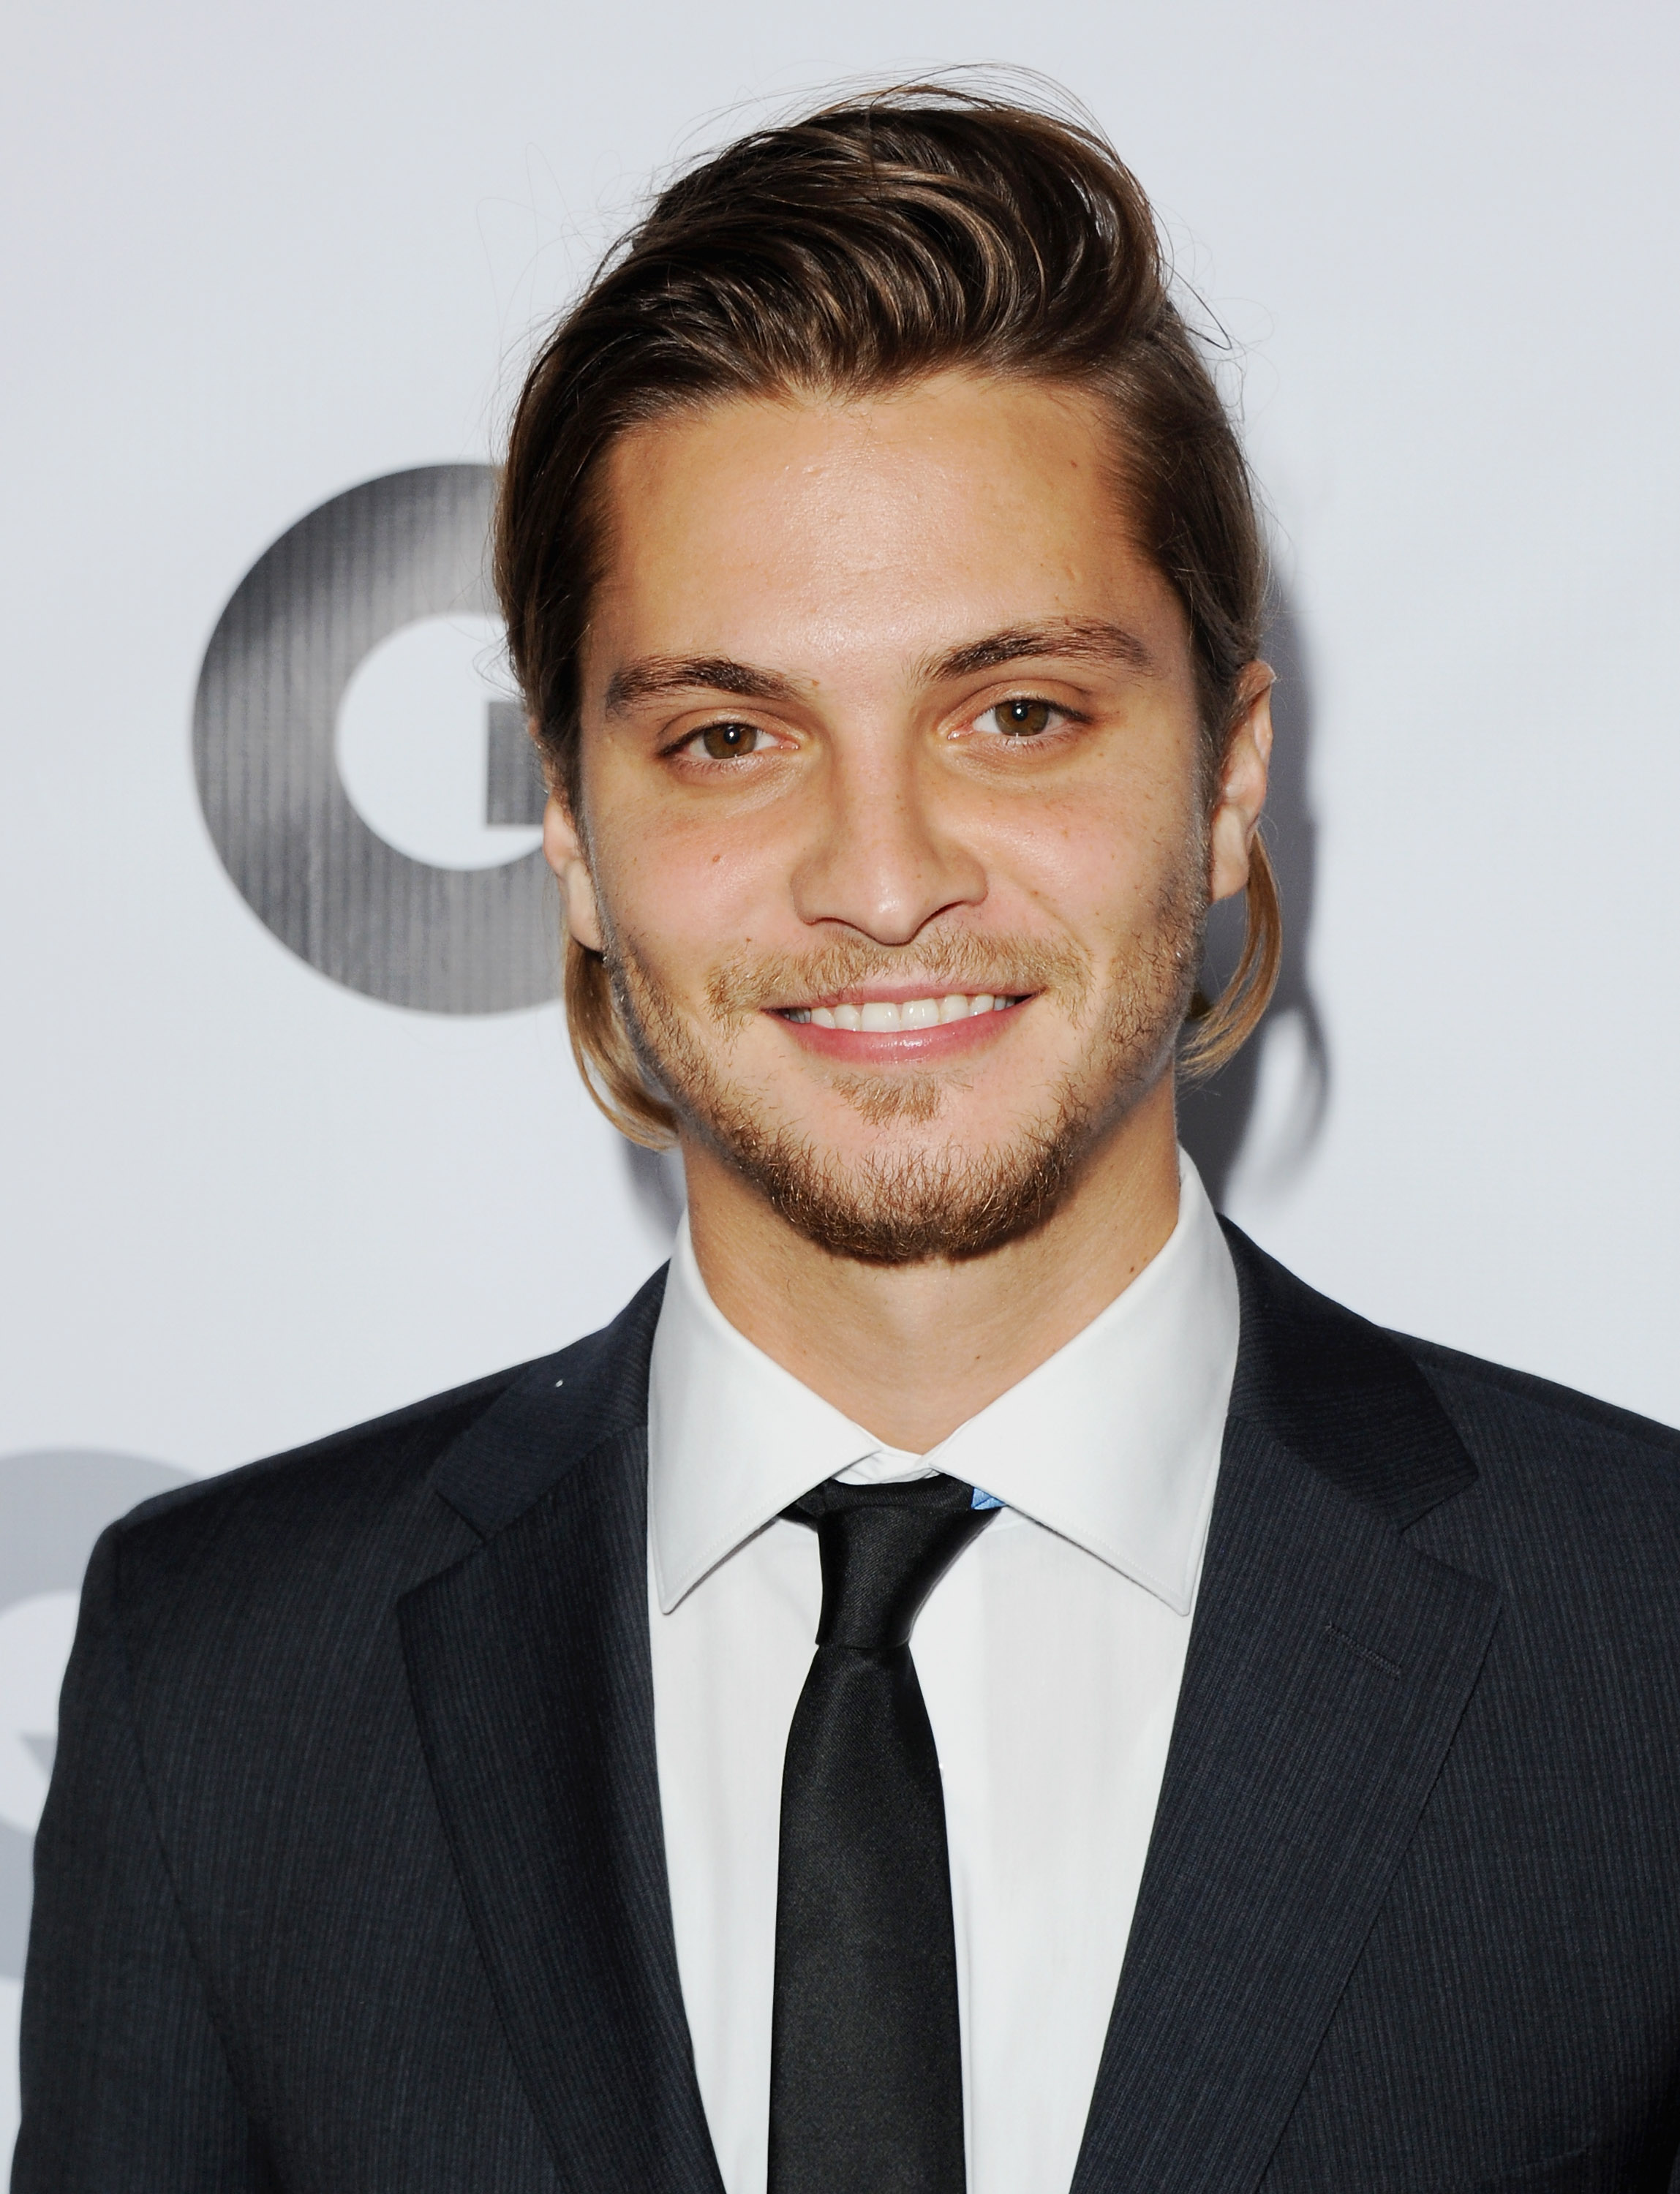 Actor Luke Grimes arrives at GQ Celebrates The 2013 "Men Of The Year" at The Wilshire Ebell Theatre on November 12, 2013 in Los Angeles. (Jon Kopaloff—FilmMagic/Getty Images)